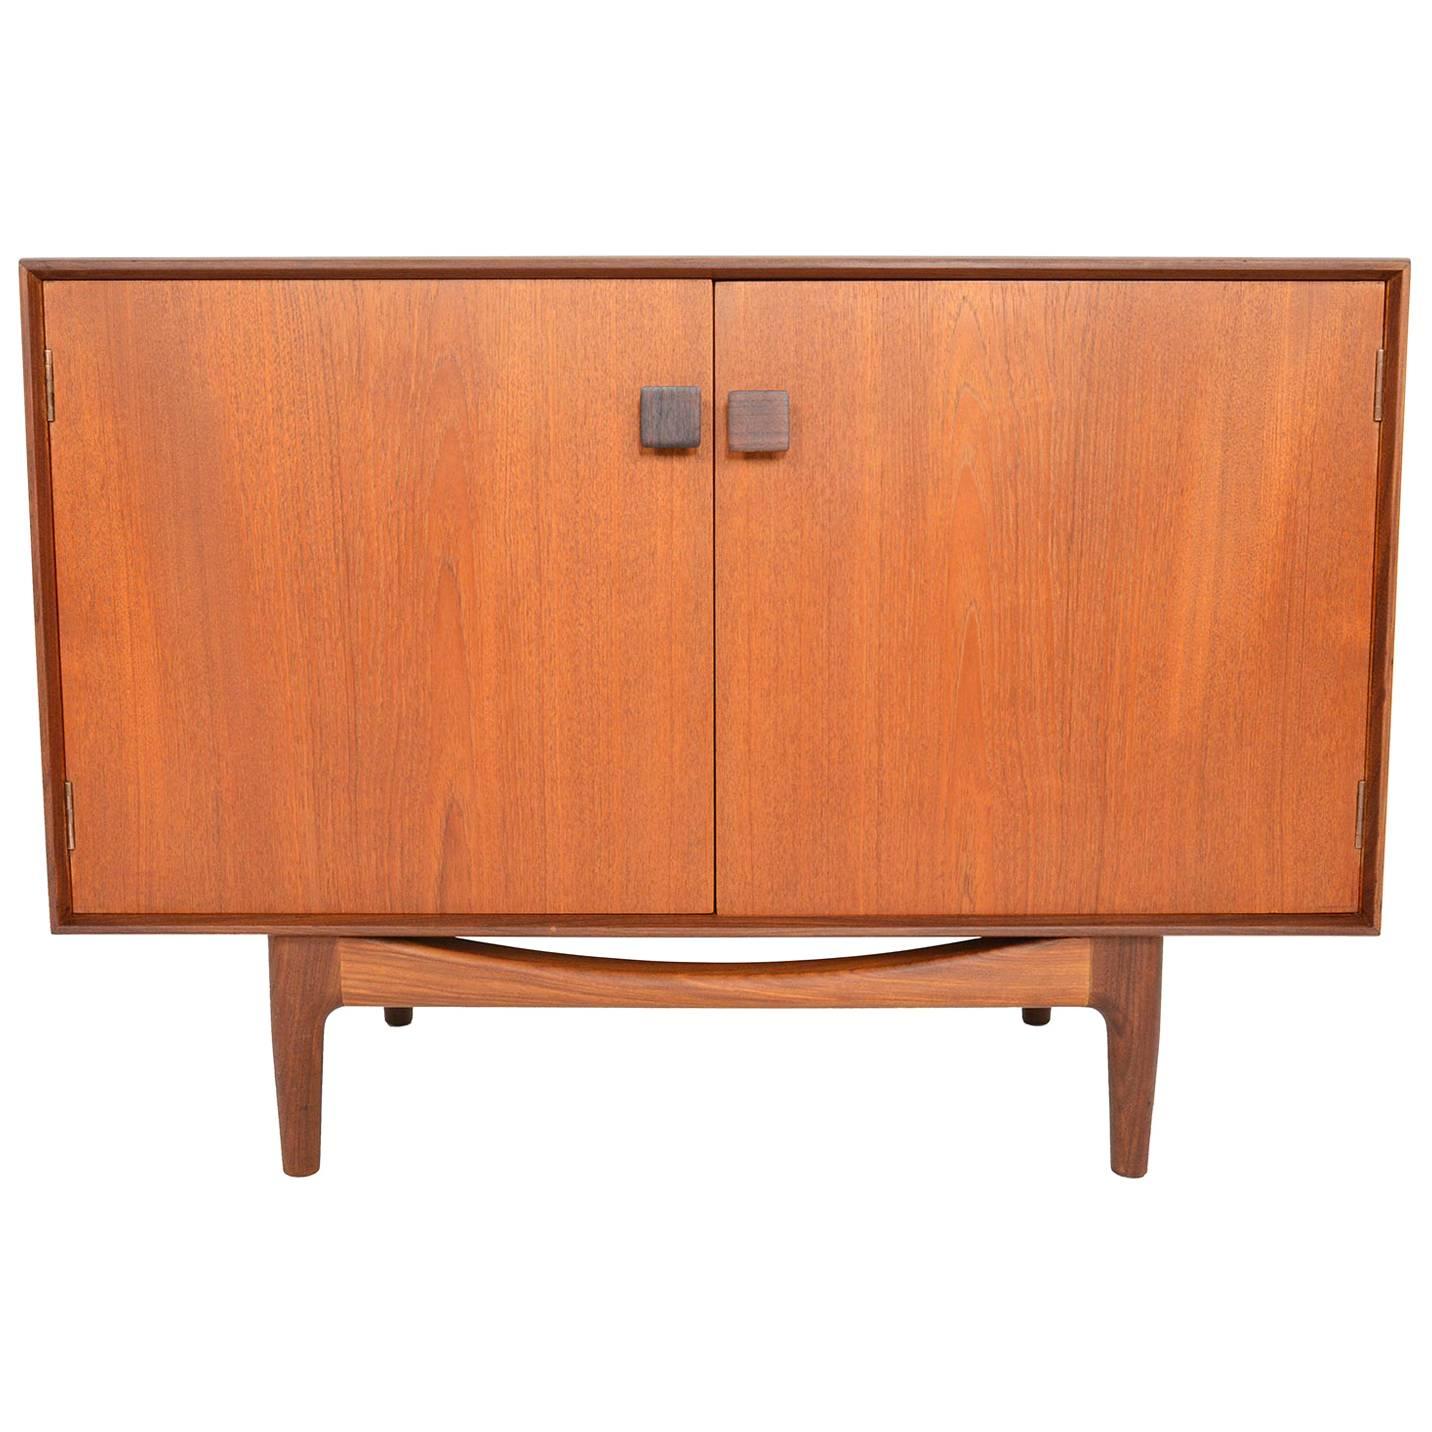 Small Refinished Teak Credenza by Ib Kofod Larsen for G Plan #3